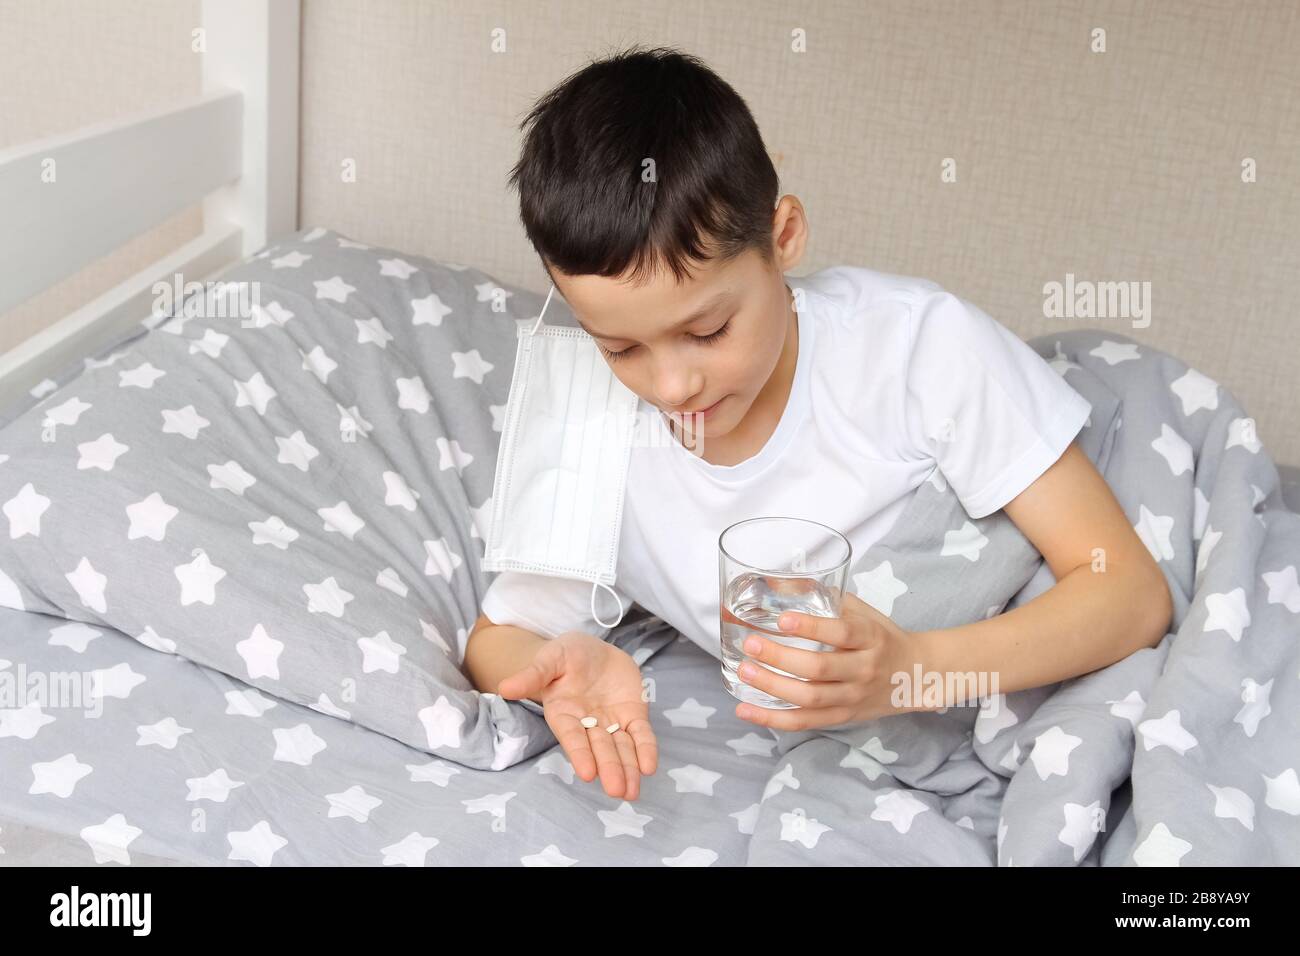 Caucasian boy with dark hair is lying in bed, holding pills and a glass of water, he is ill, taking medicine. The concept of home treatment. Stock Photo